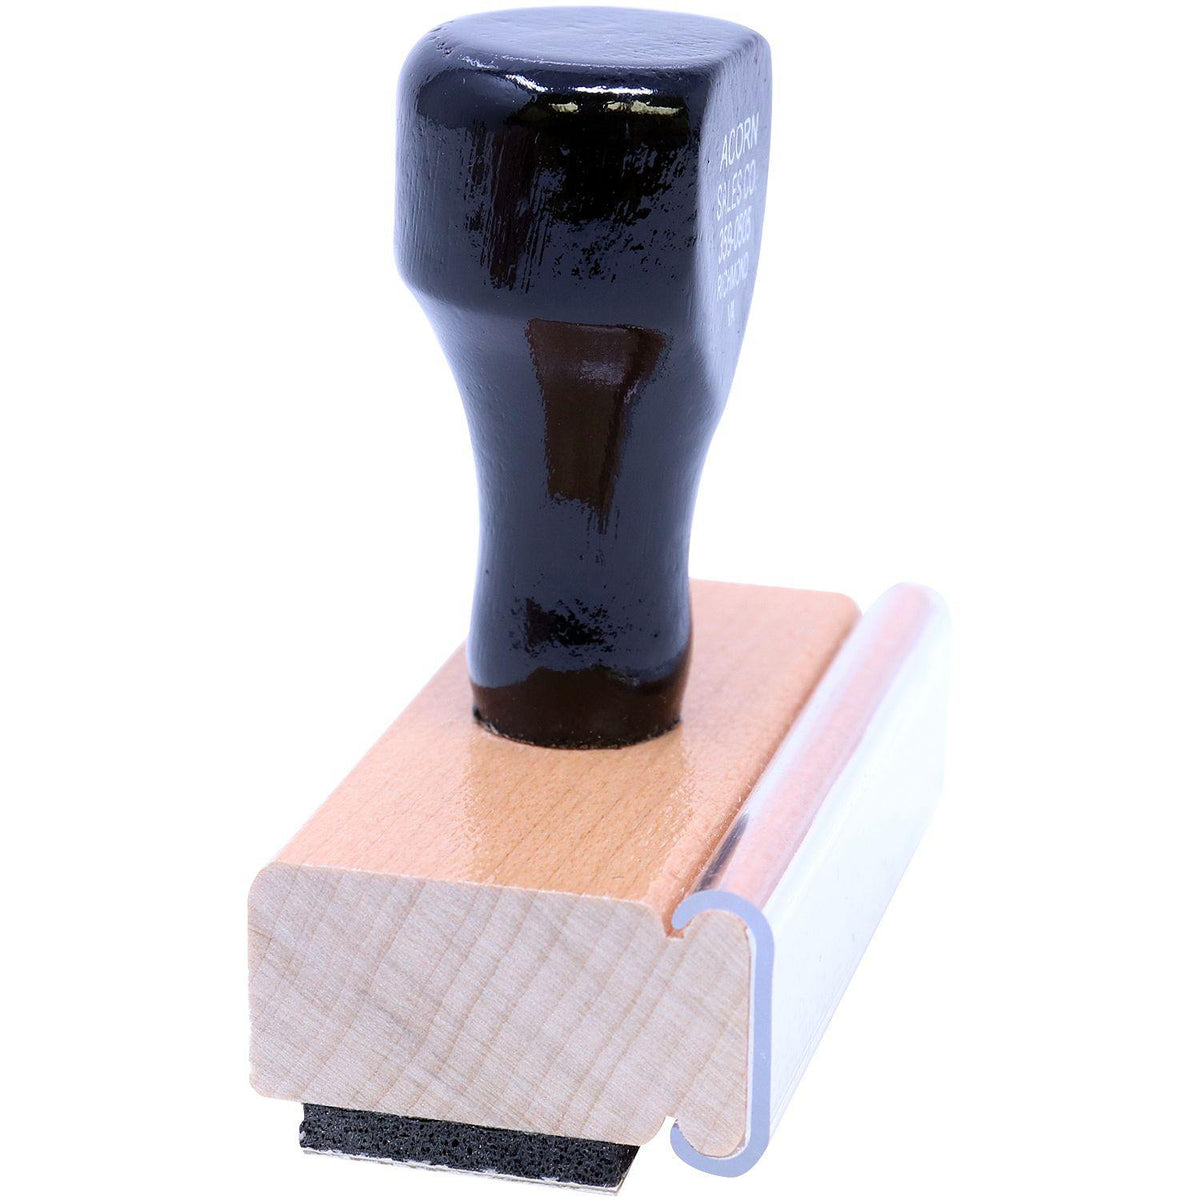 Side View of Large Promoted Rubber Stamp at an Angle